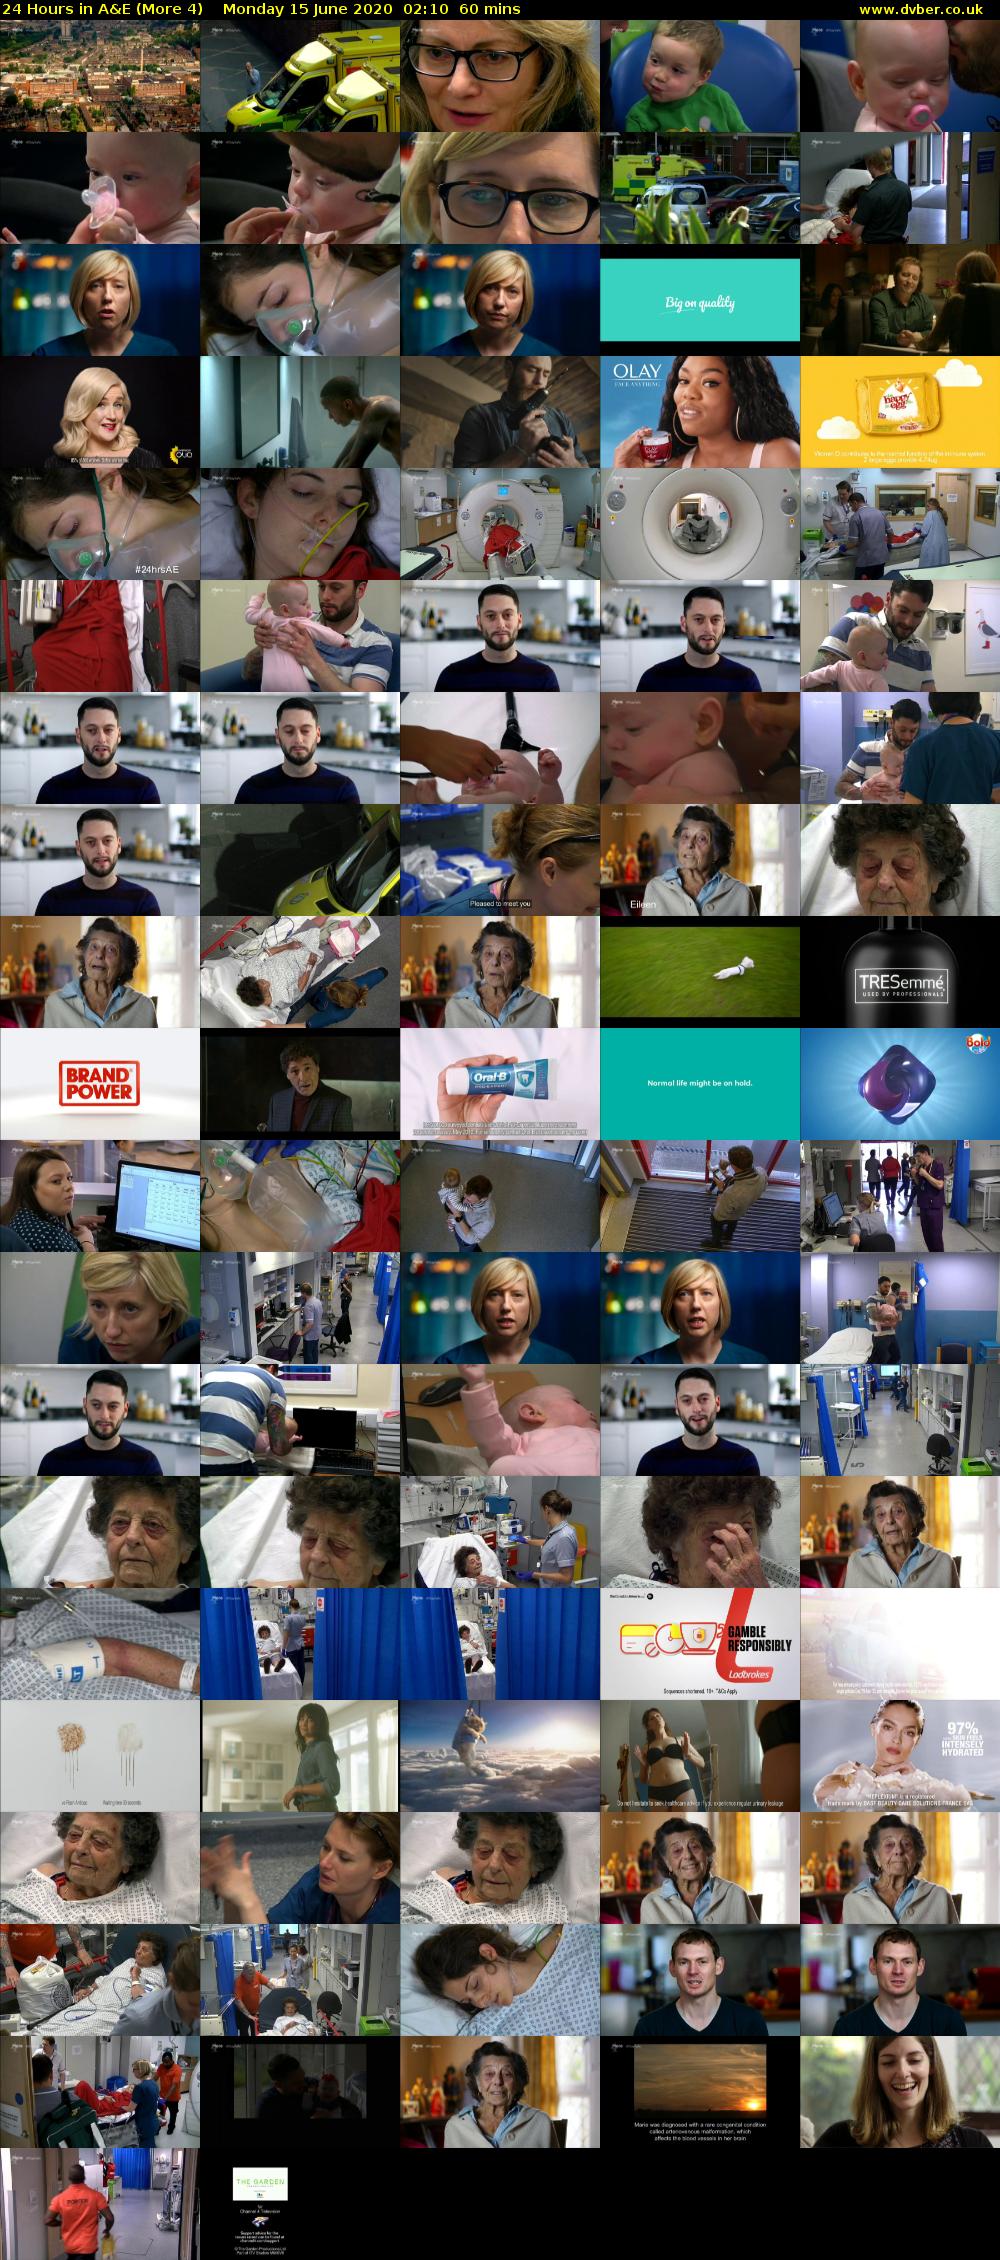 24 Hours in A&E (More 4) Monday 15 June 2020 02:10 - 03:10